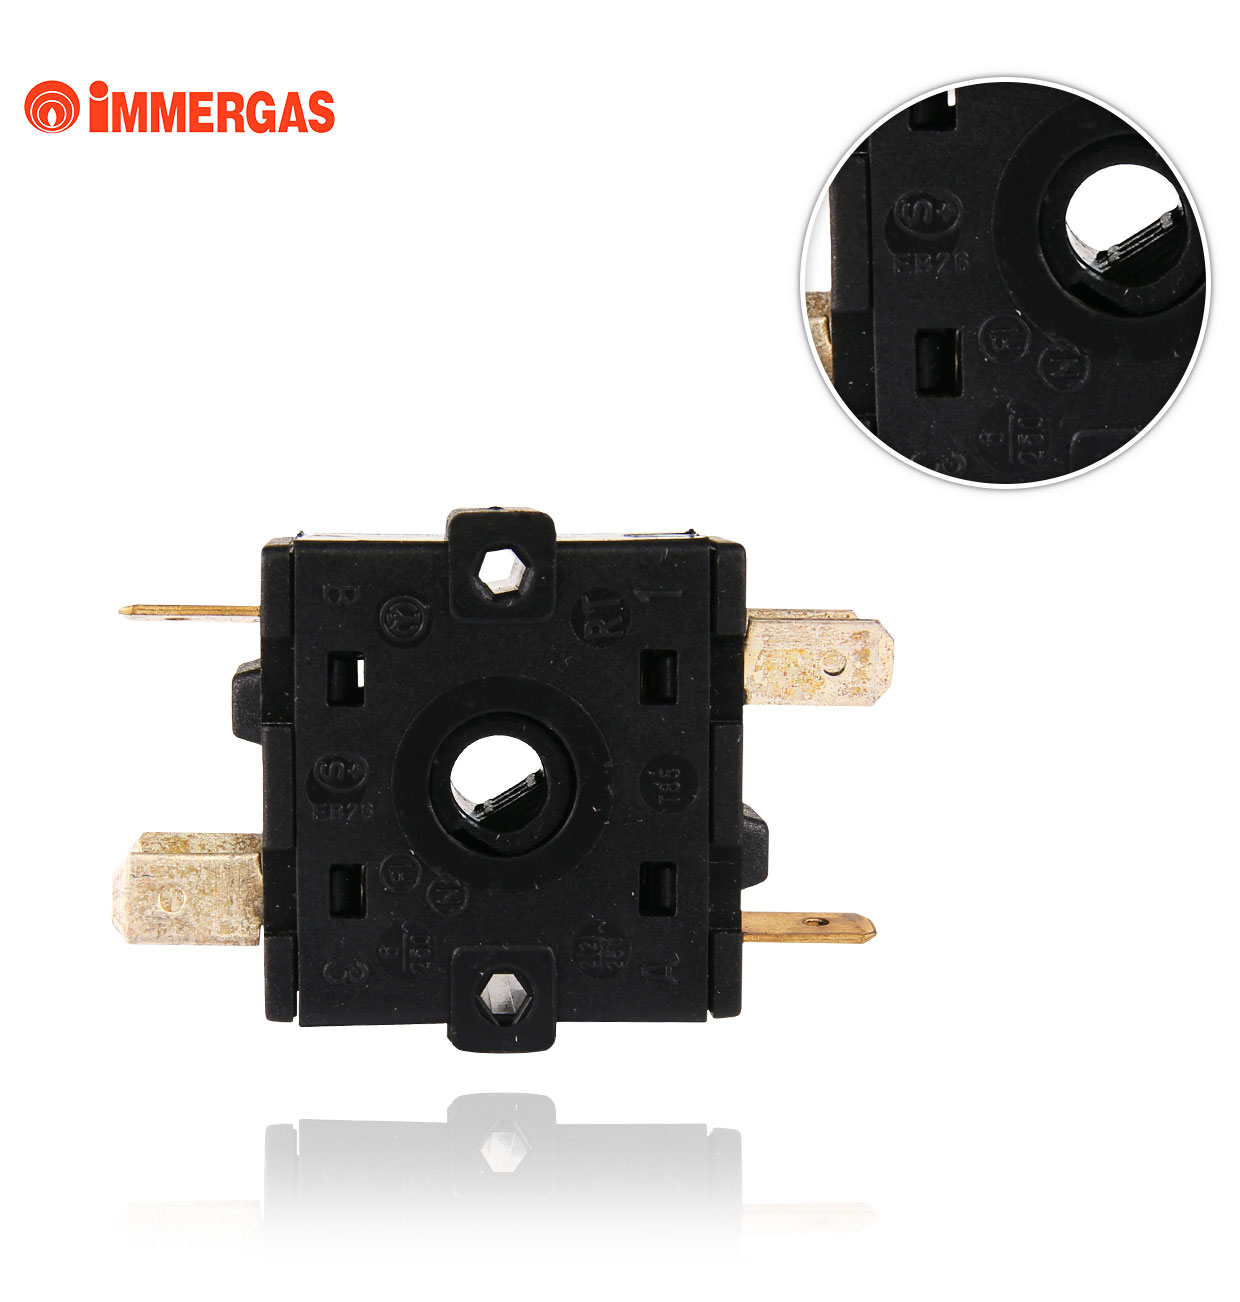 IMMERGAS MAIOR RESET + 3-POSITION SWITCH